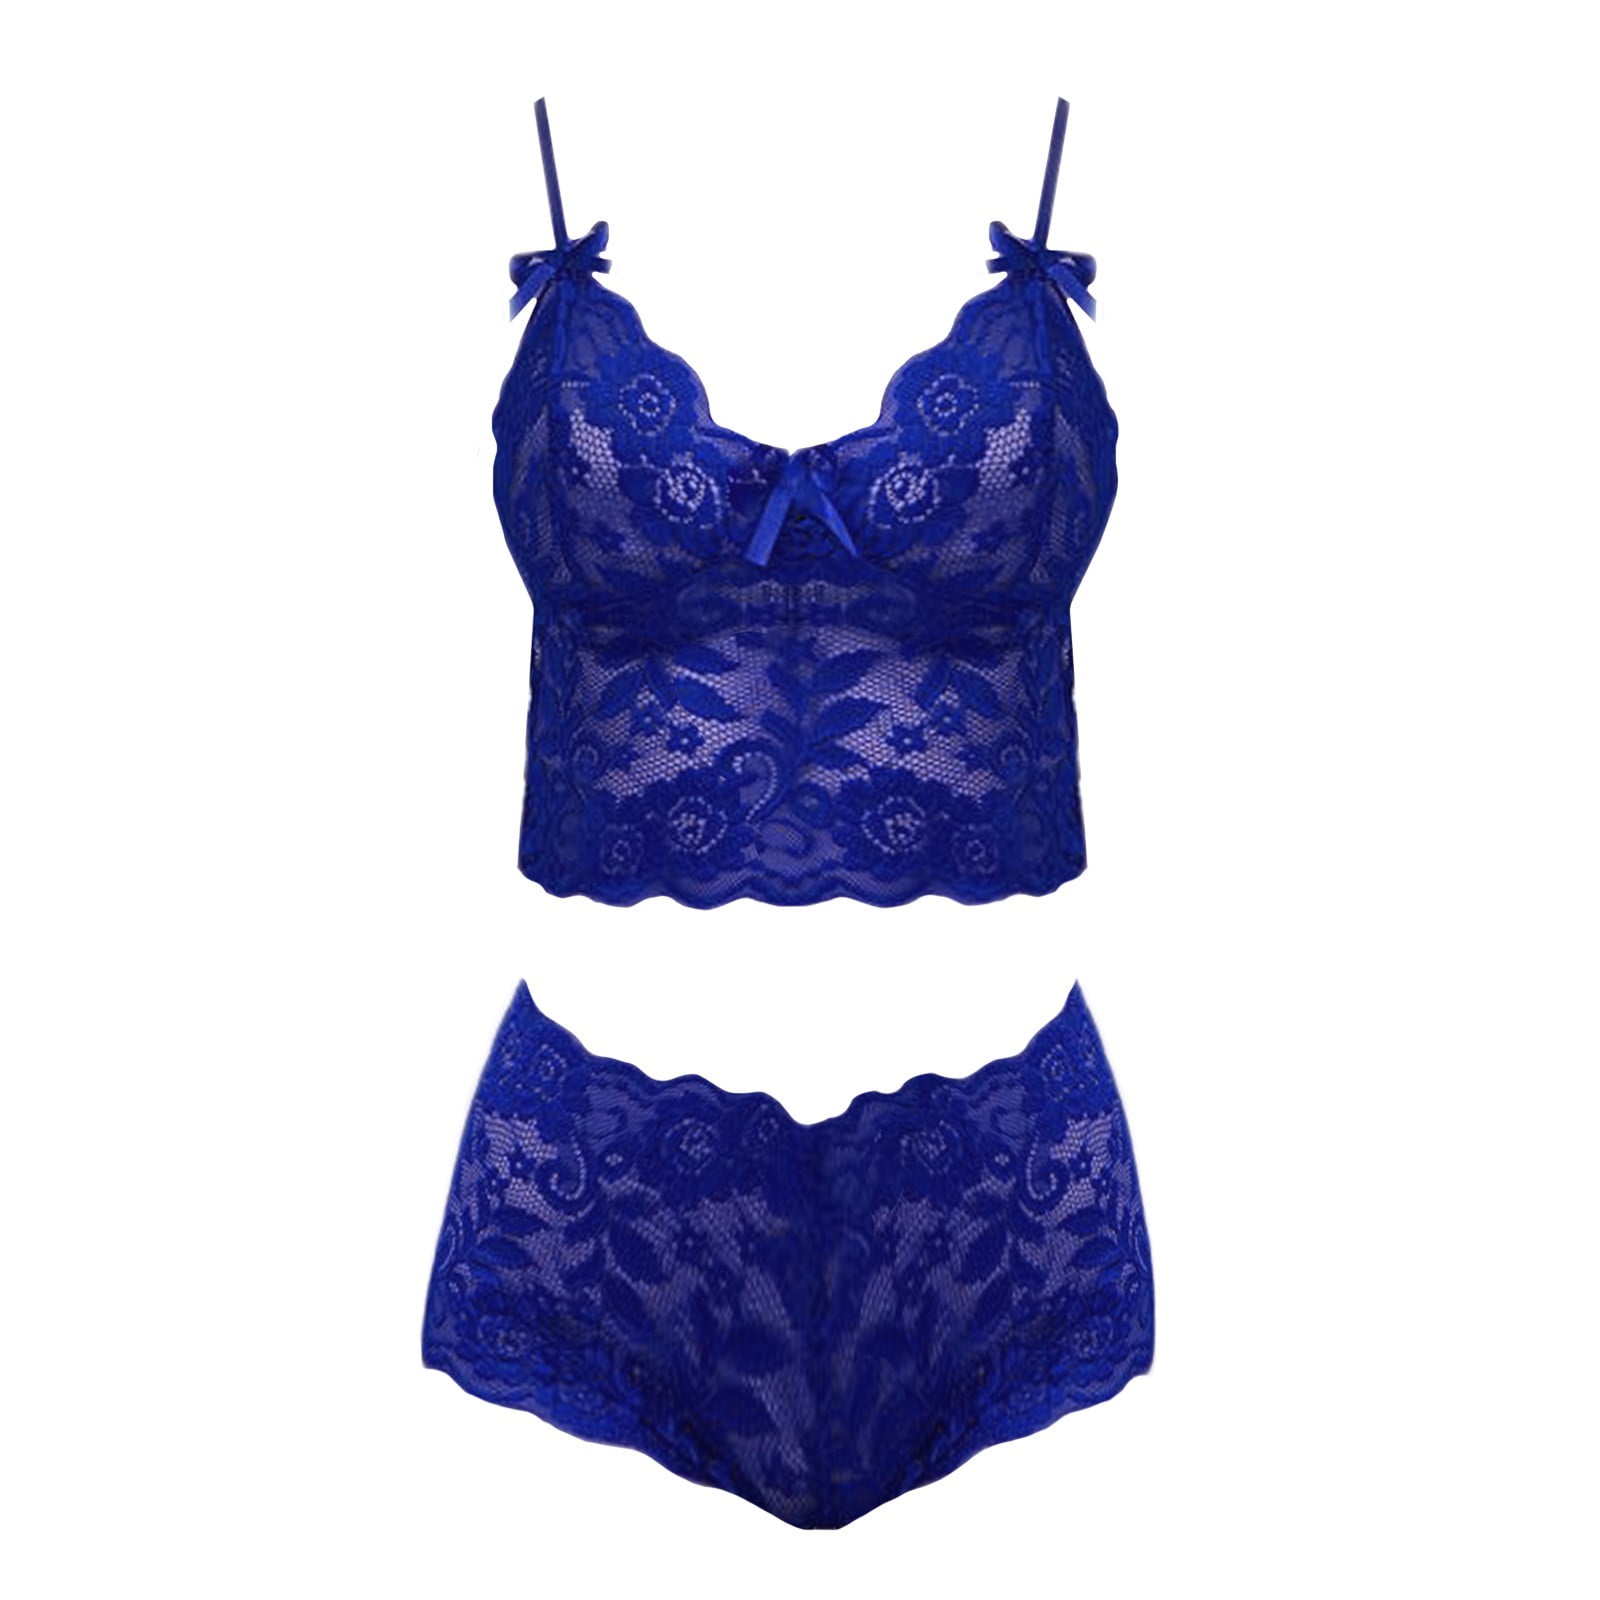 Vedolay Matching Bra And Panty Sets Plus Size 2 Piece Lingerie for Women  Strappy Bra and Panty Underwear Sets Lace Underwear Set for Women(Blue,L)